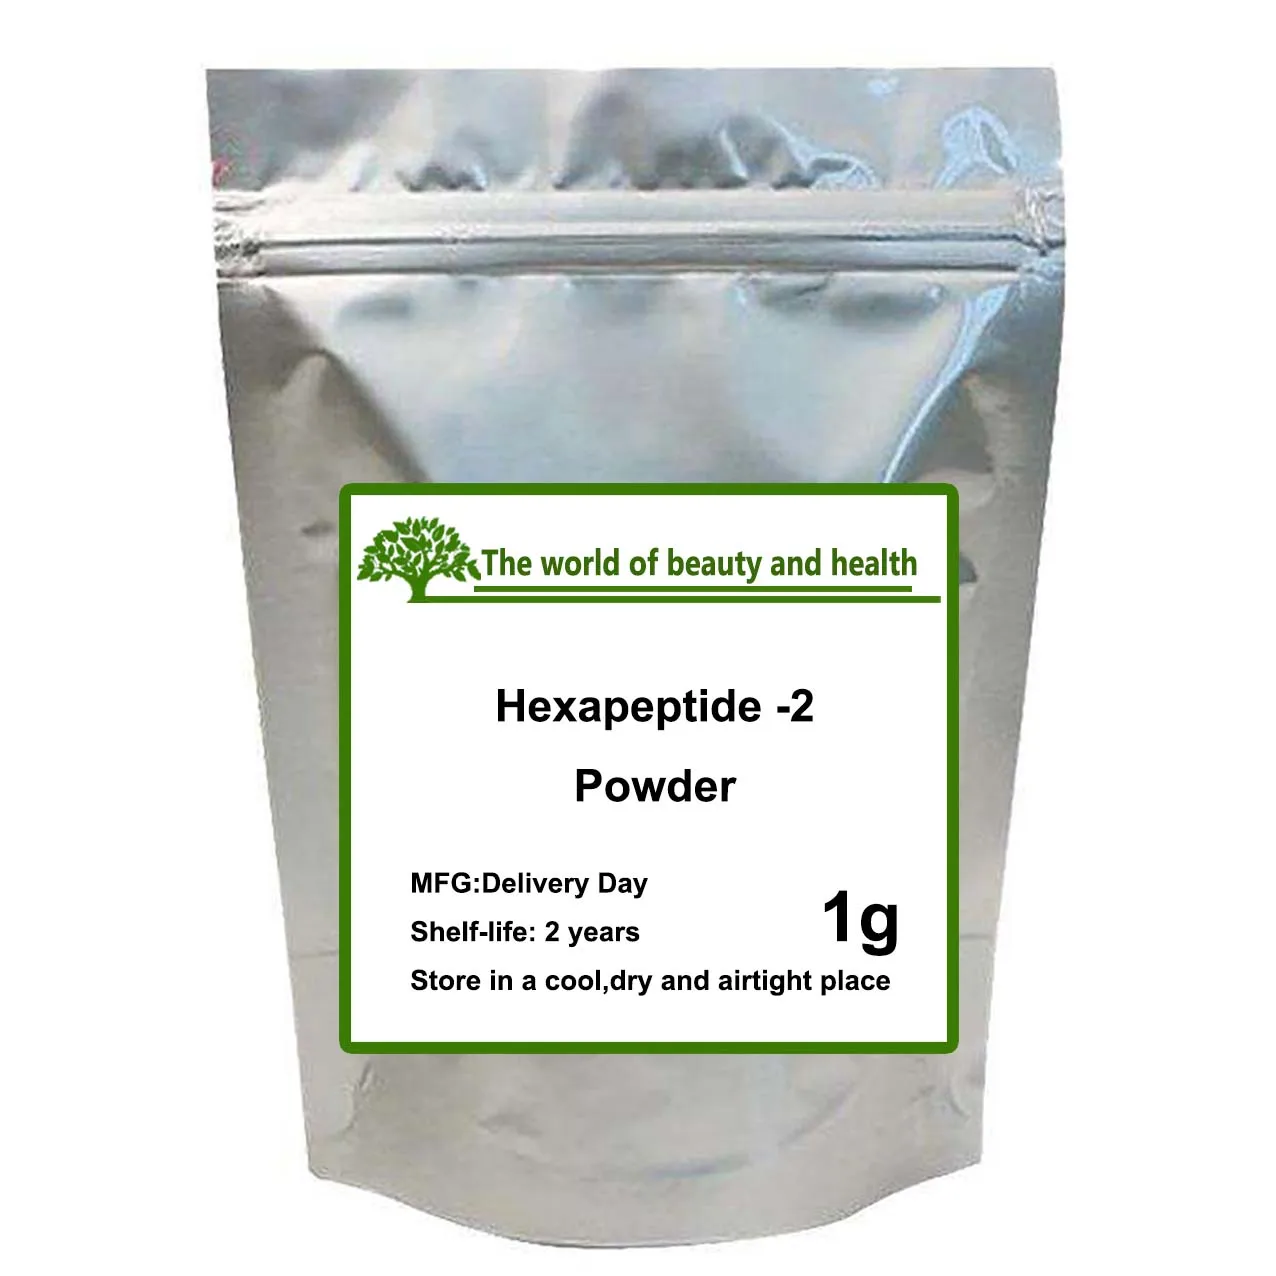 

Hot-selling cosmetic-grade hexapeptide -2 powder